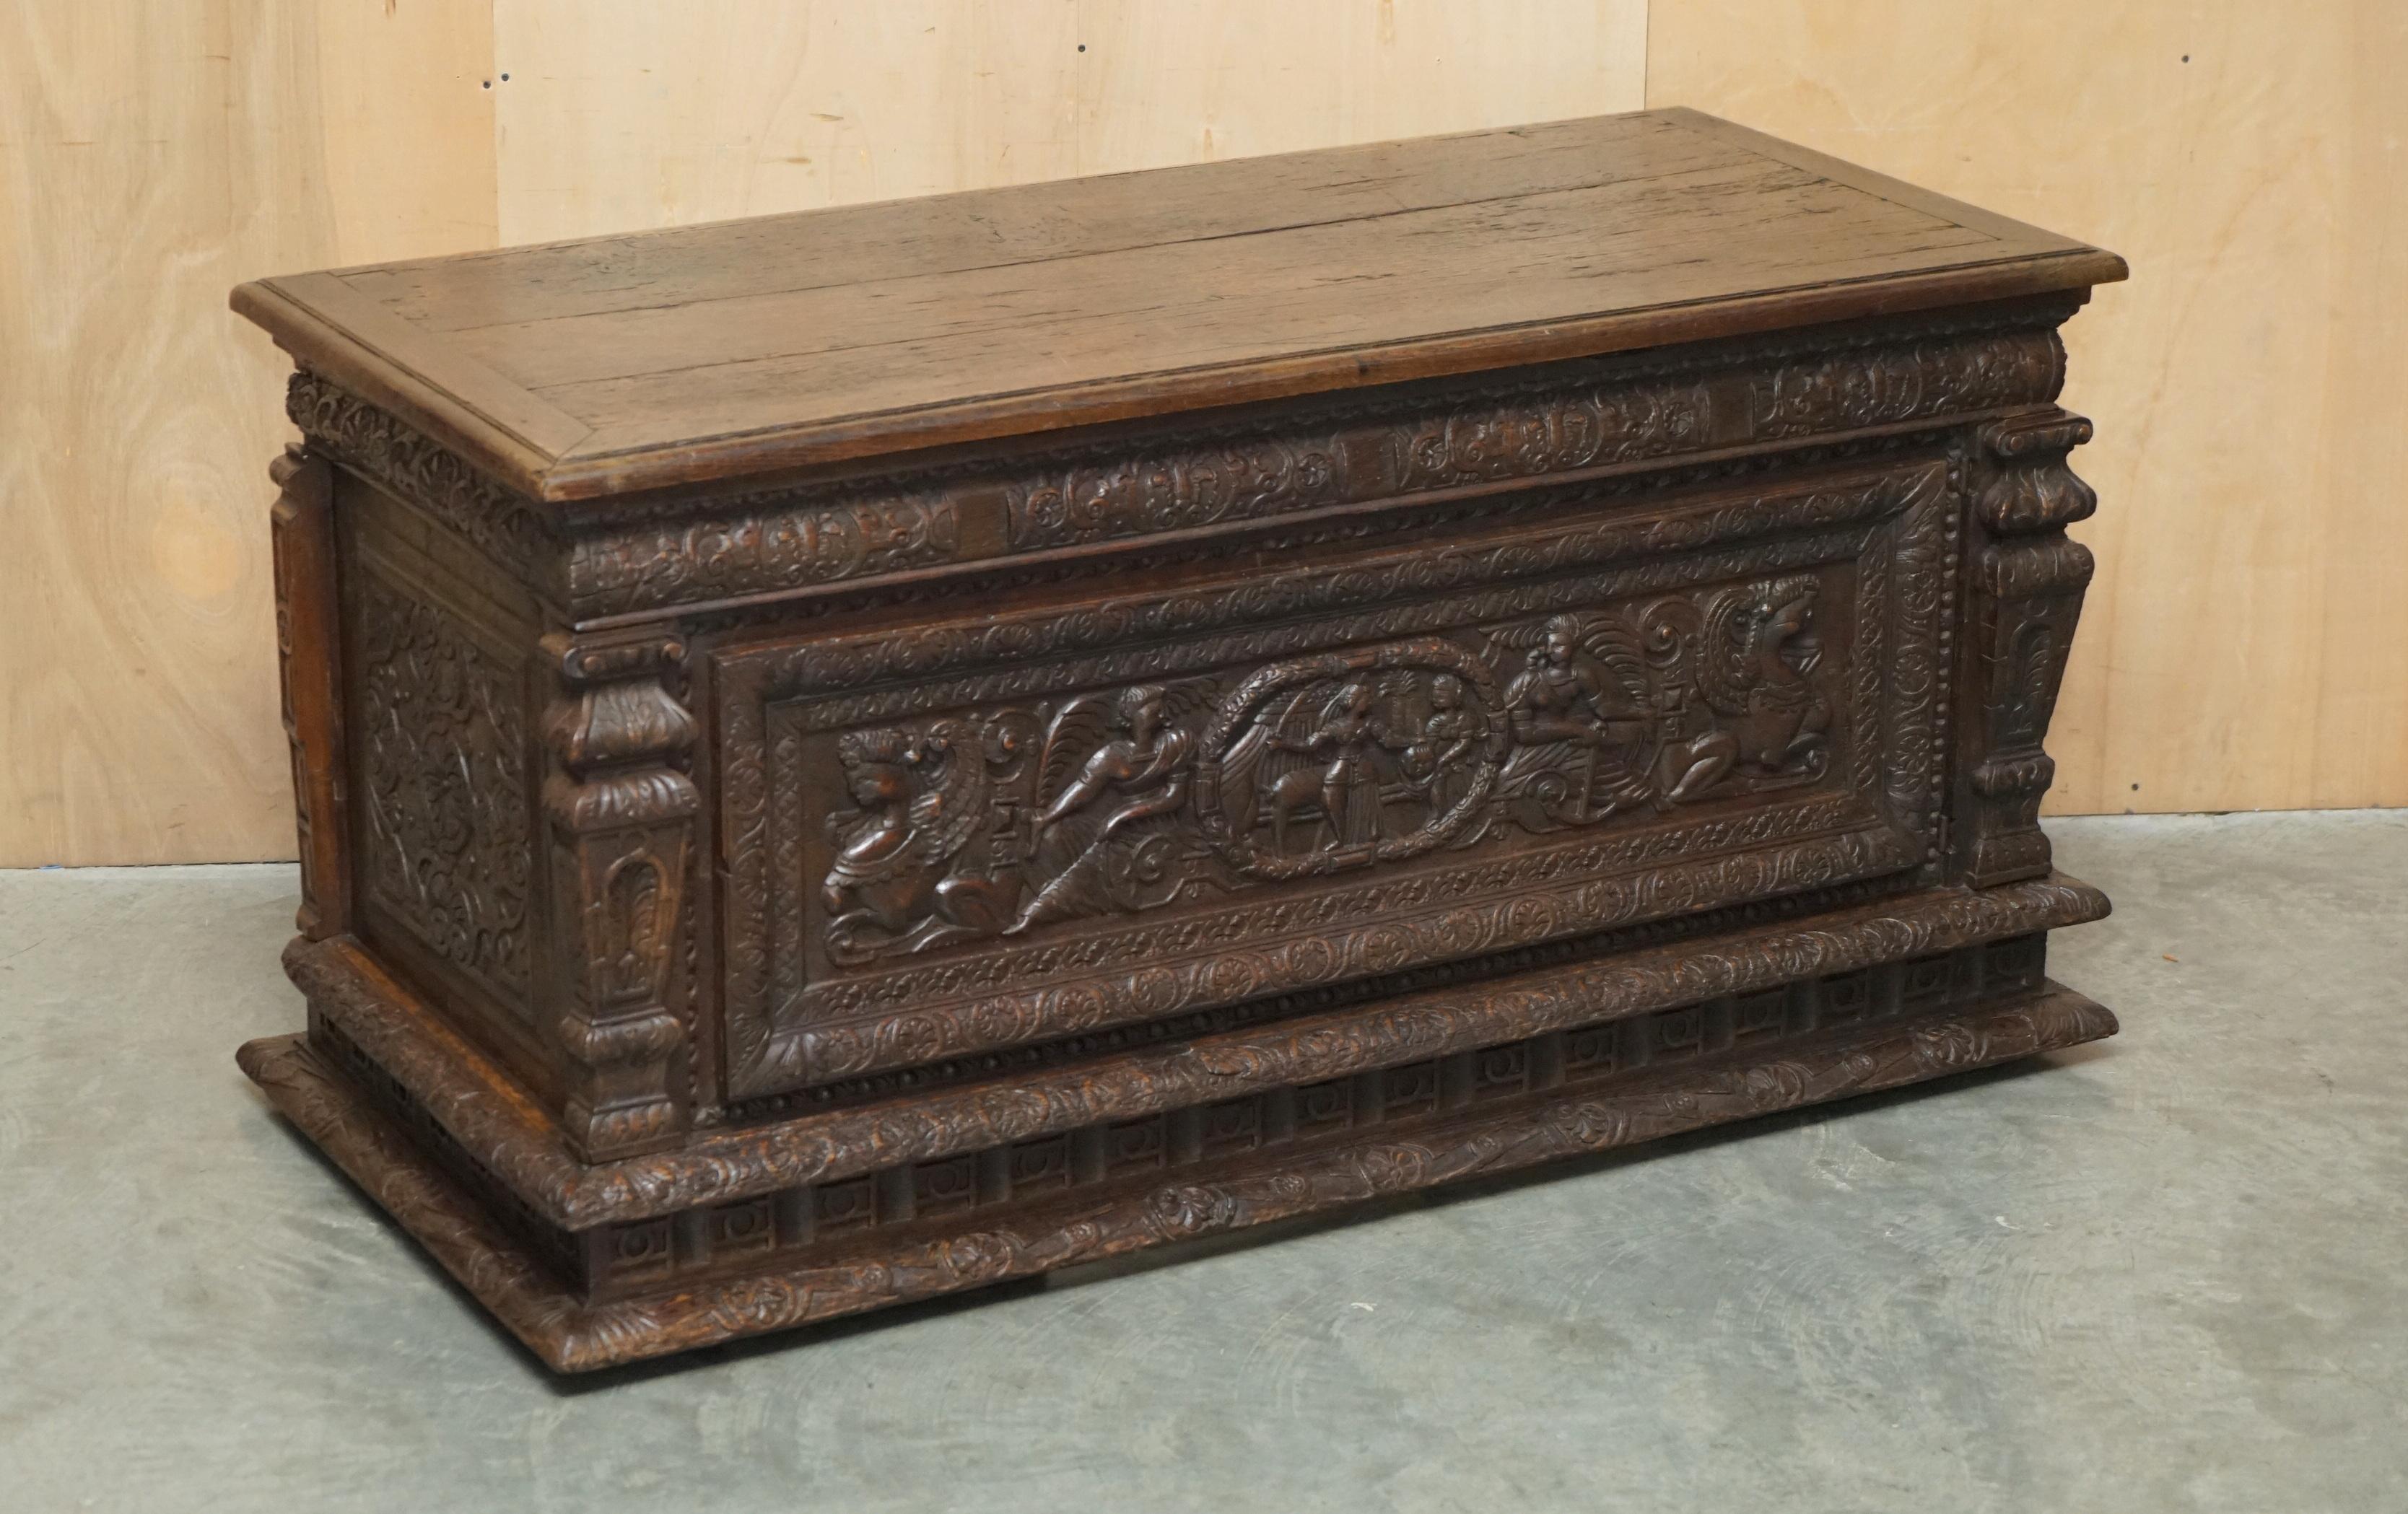 Royal House Antiques

Royal House Antiques is delighted to offer for sale this absolutely stunning, very large, Exhibition / Museum quality, hand carved 16th Century southern Italian Cassone desk

Please note the delivery fee listed is just a guide,